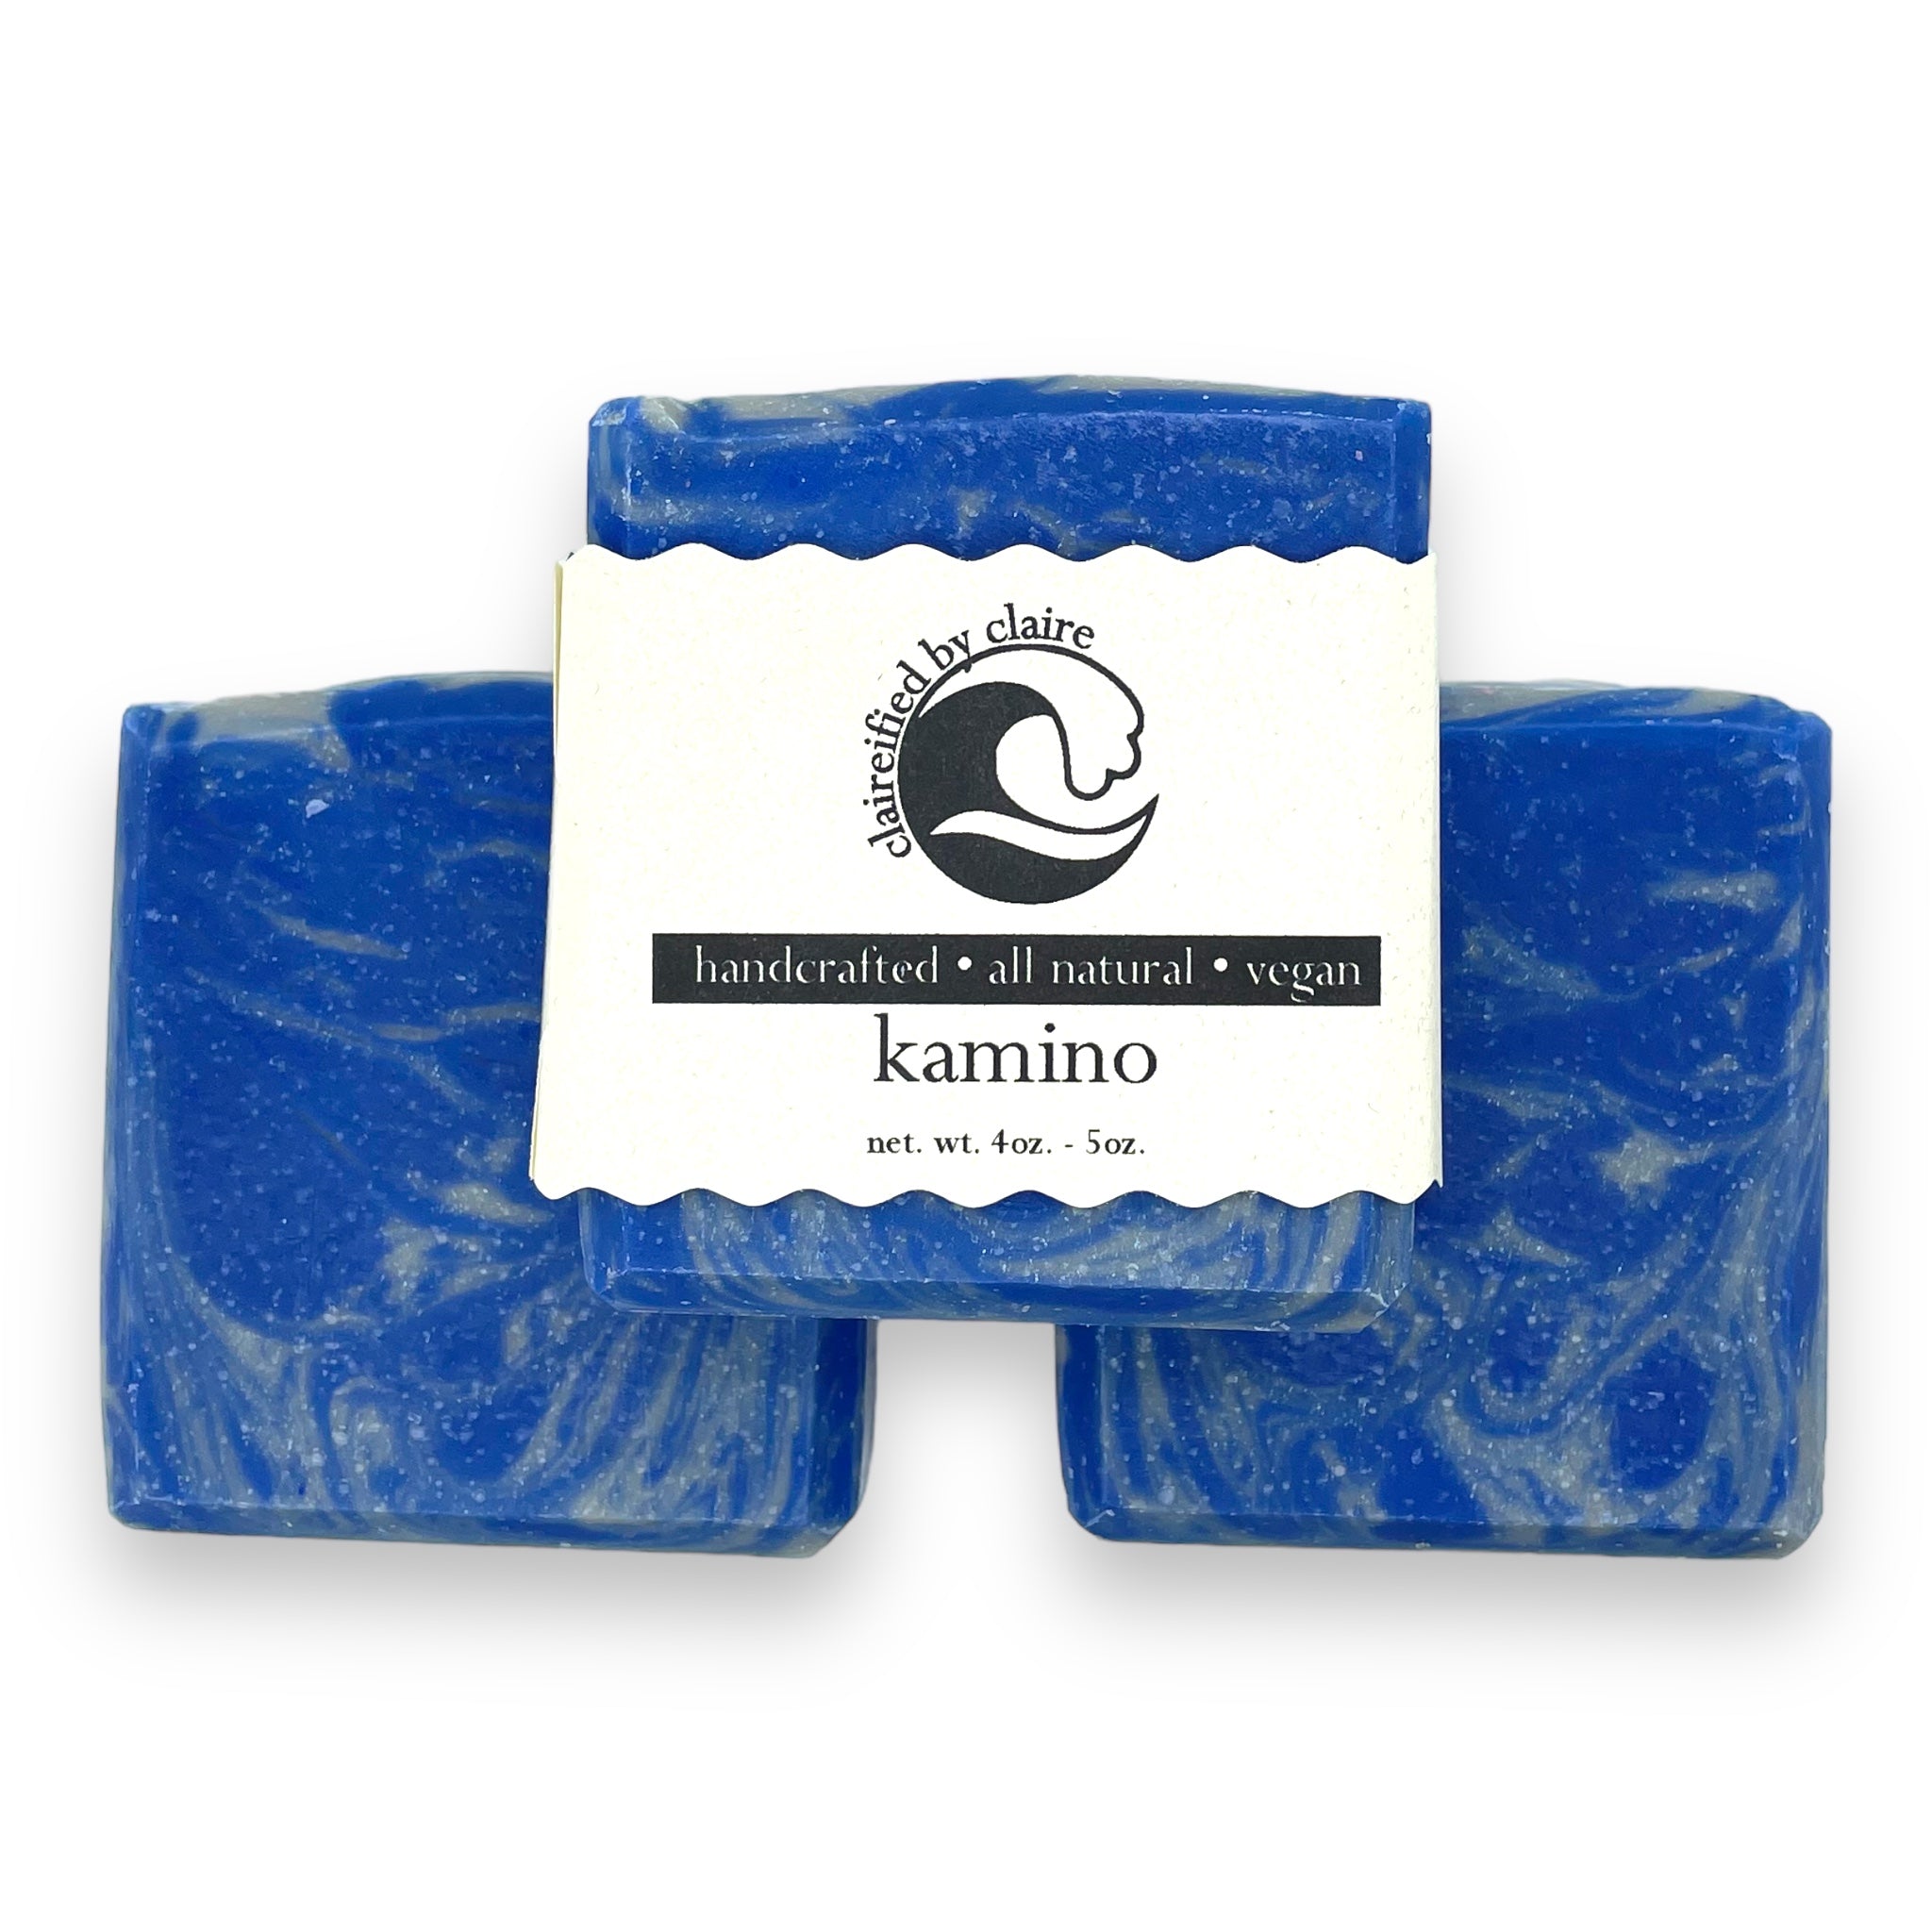 Kamino Handmade Soap inspired by the water planet, home of the Kaminoans-2